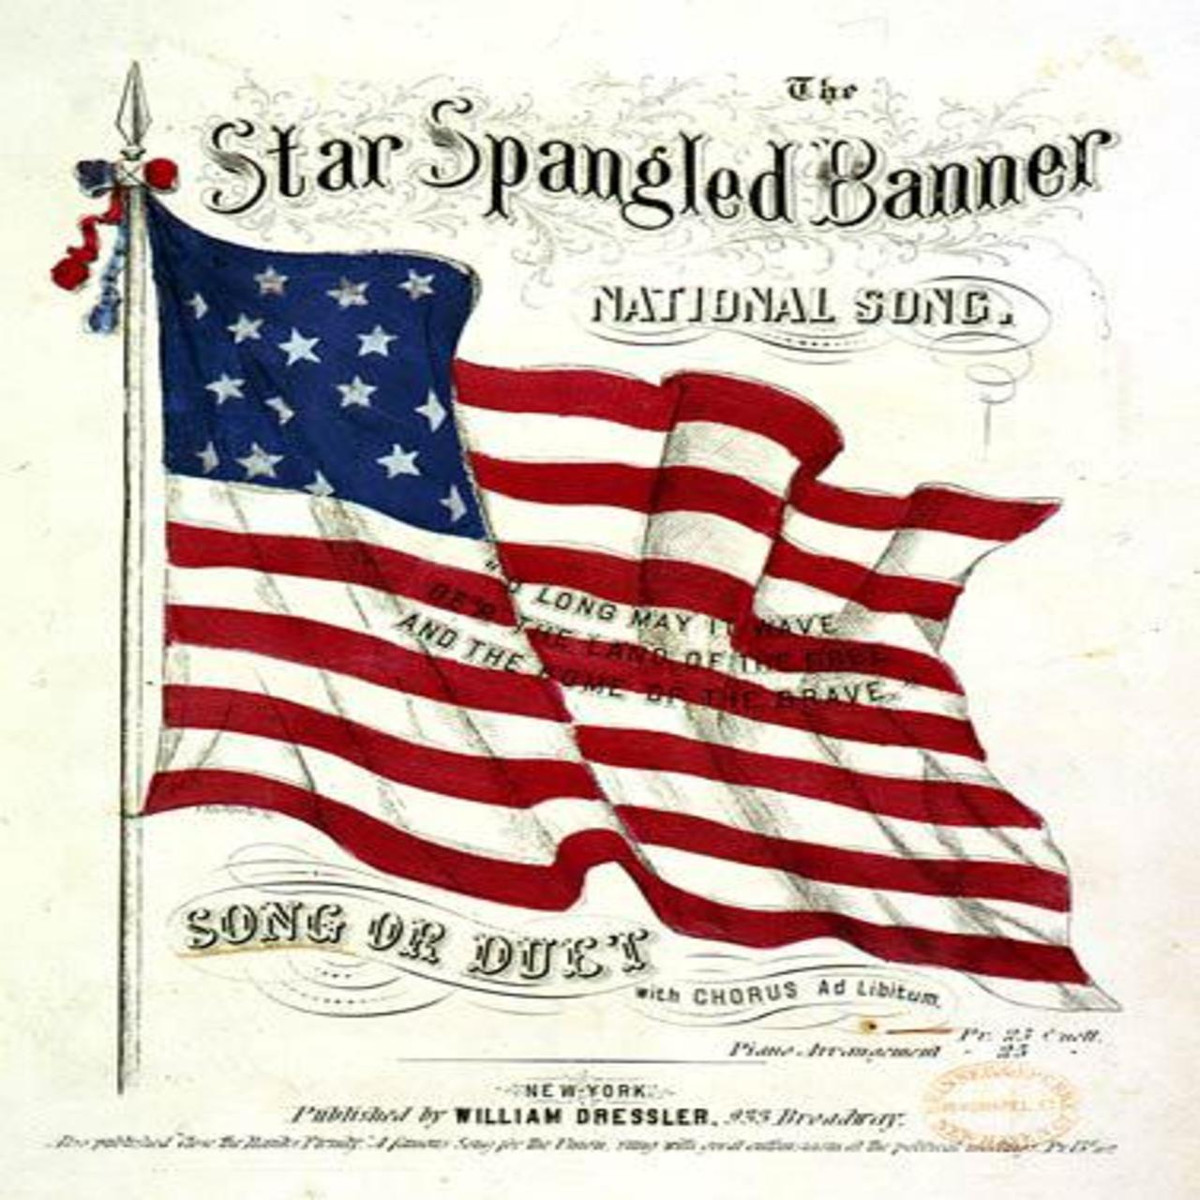 Star Spangled Banner Picture - Downloadable Image